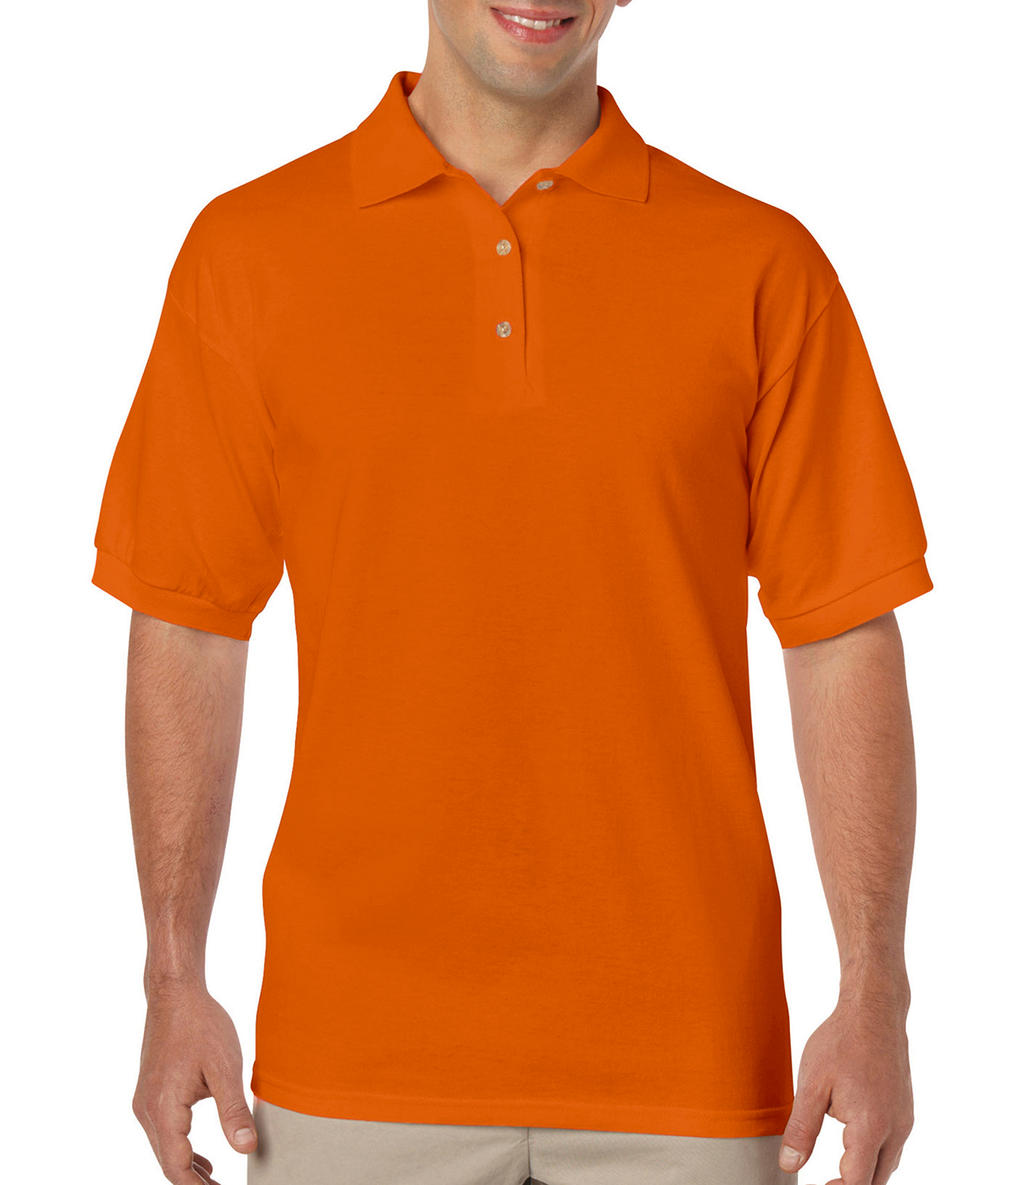  DryBlend Adult Jersey Polo in Farbe Safety Orange